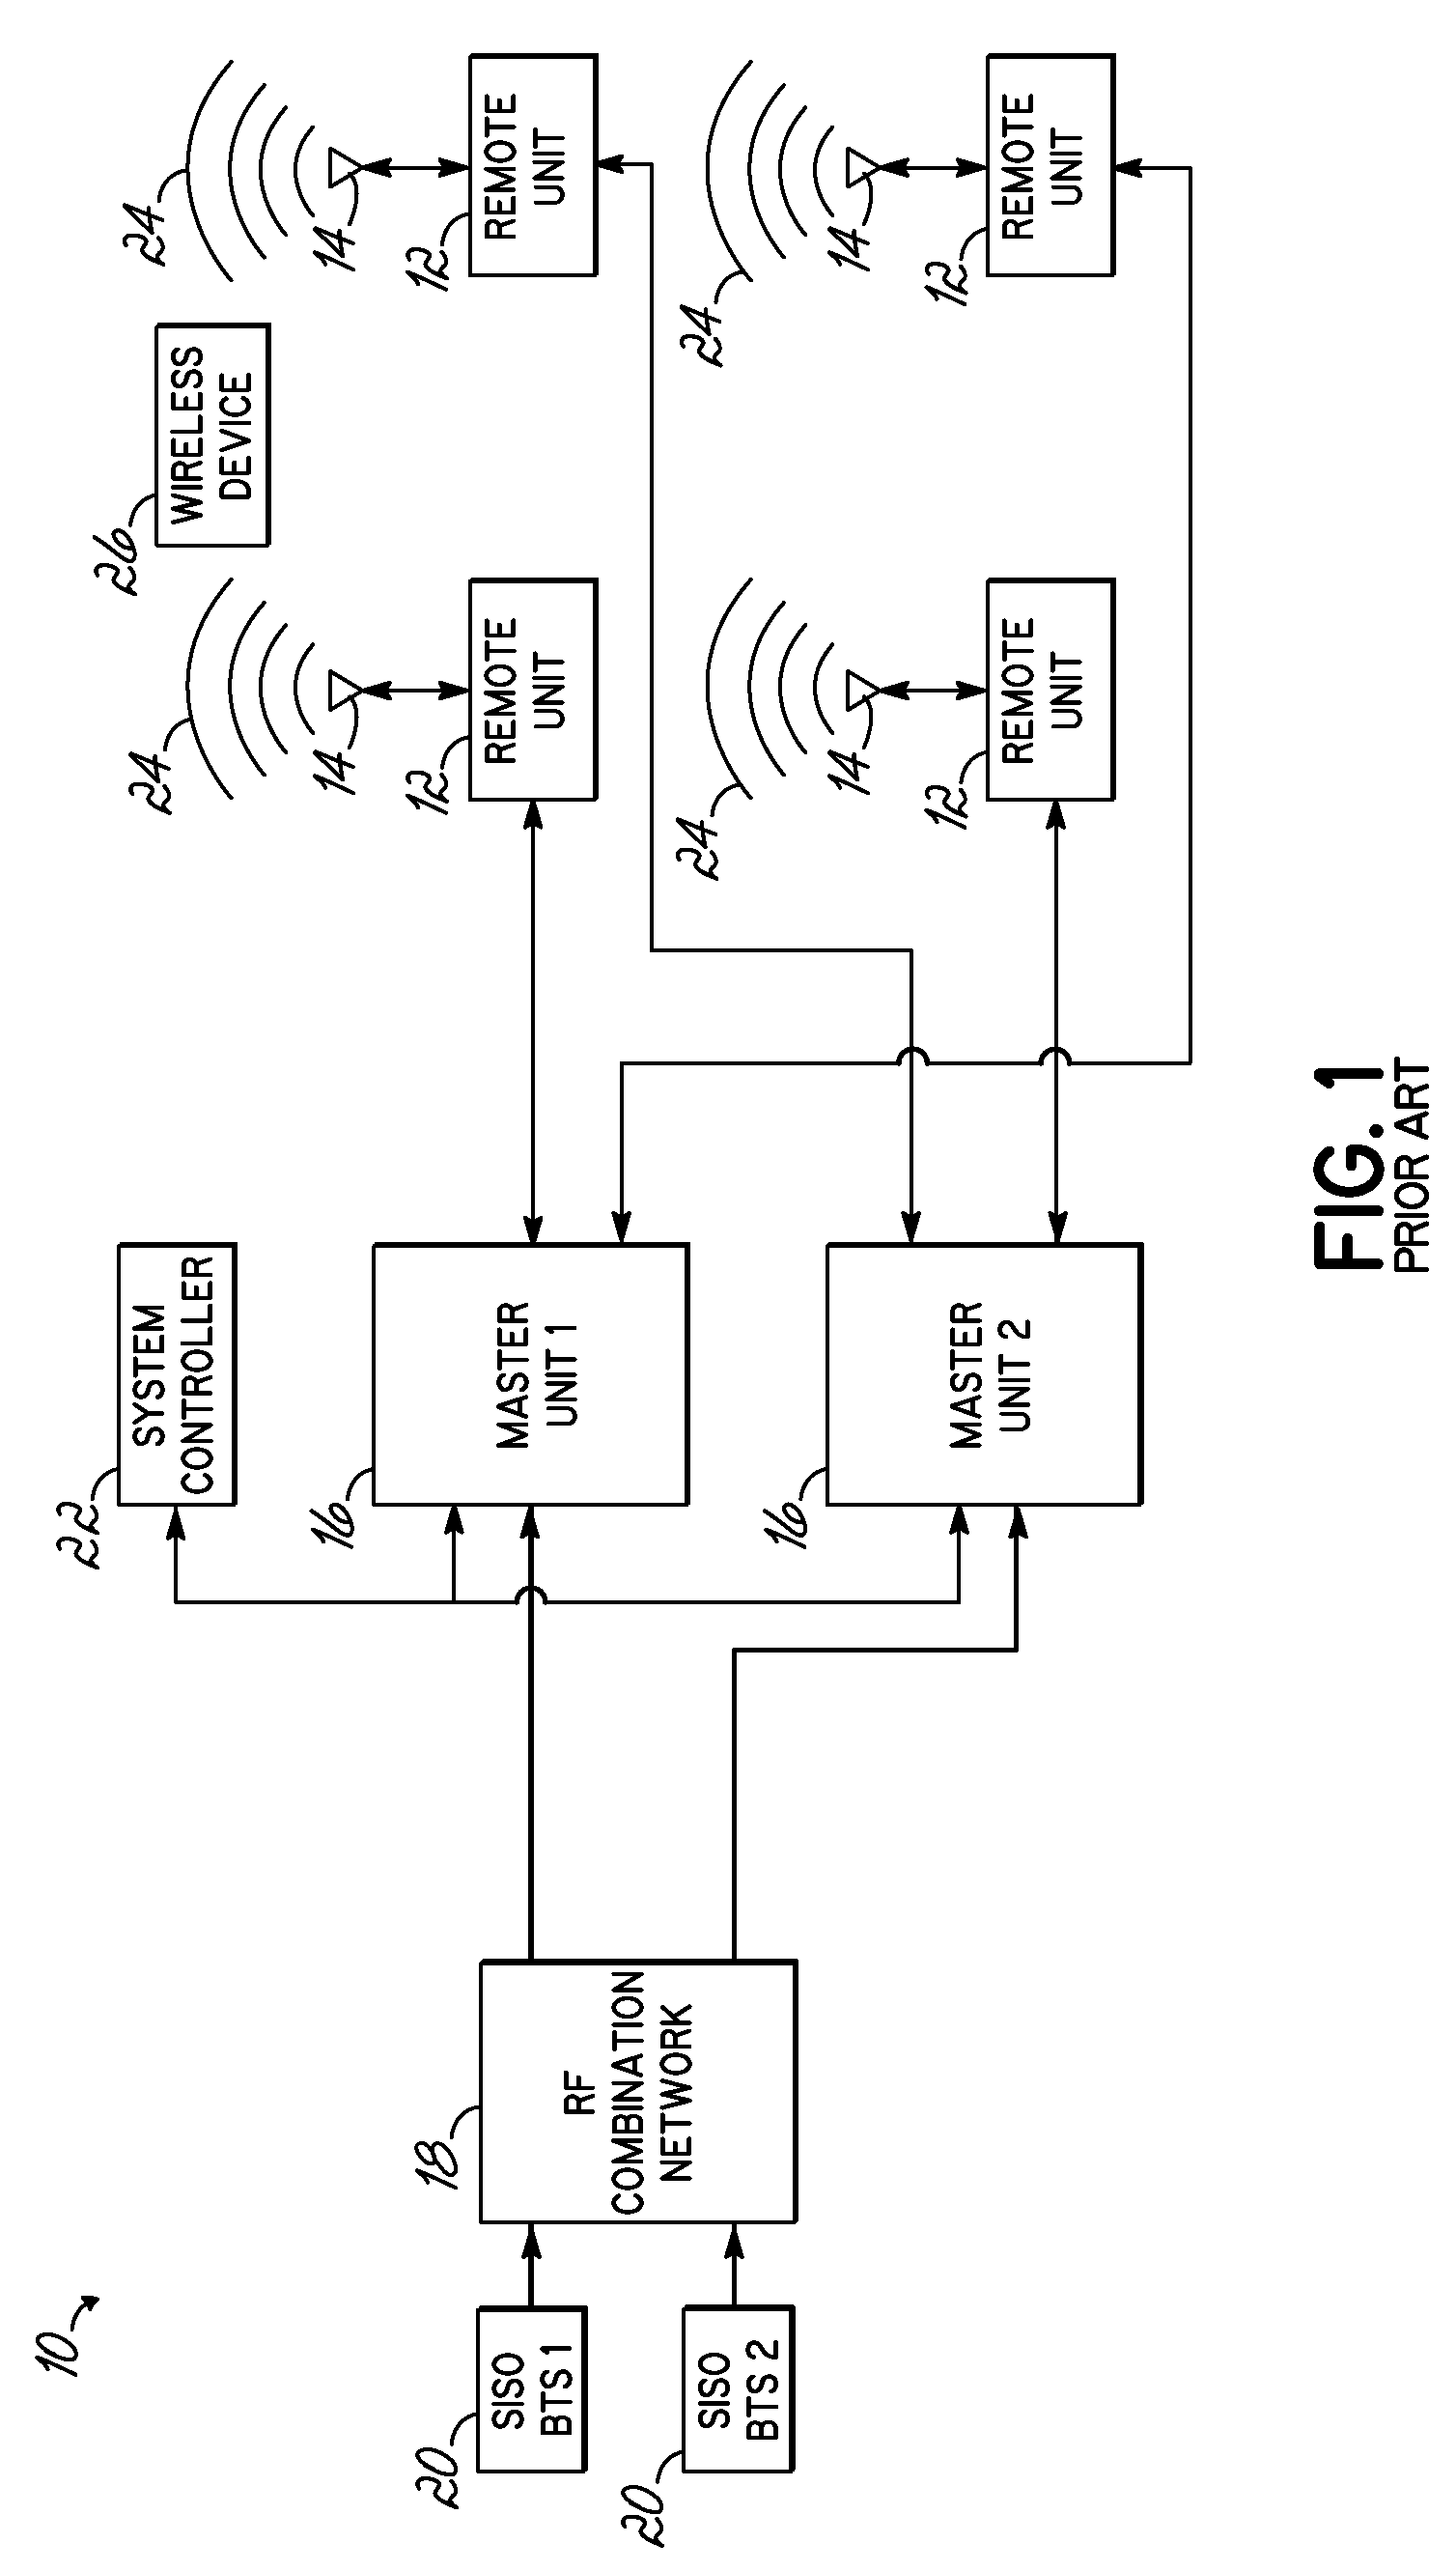 Distributed antenna system for MIMO signals